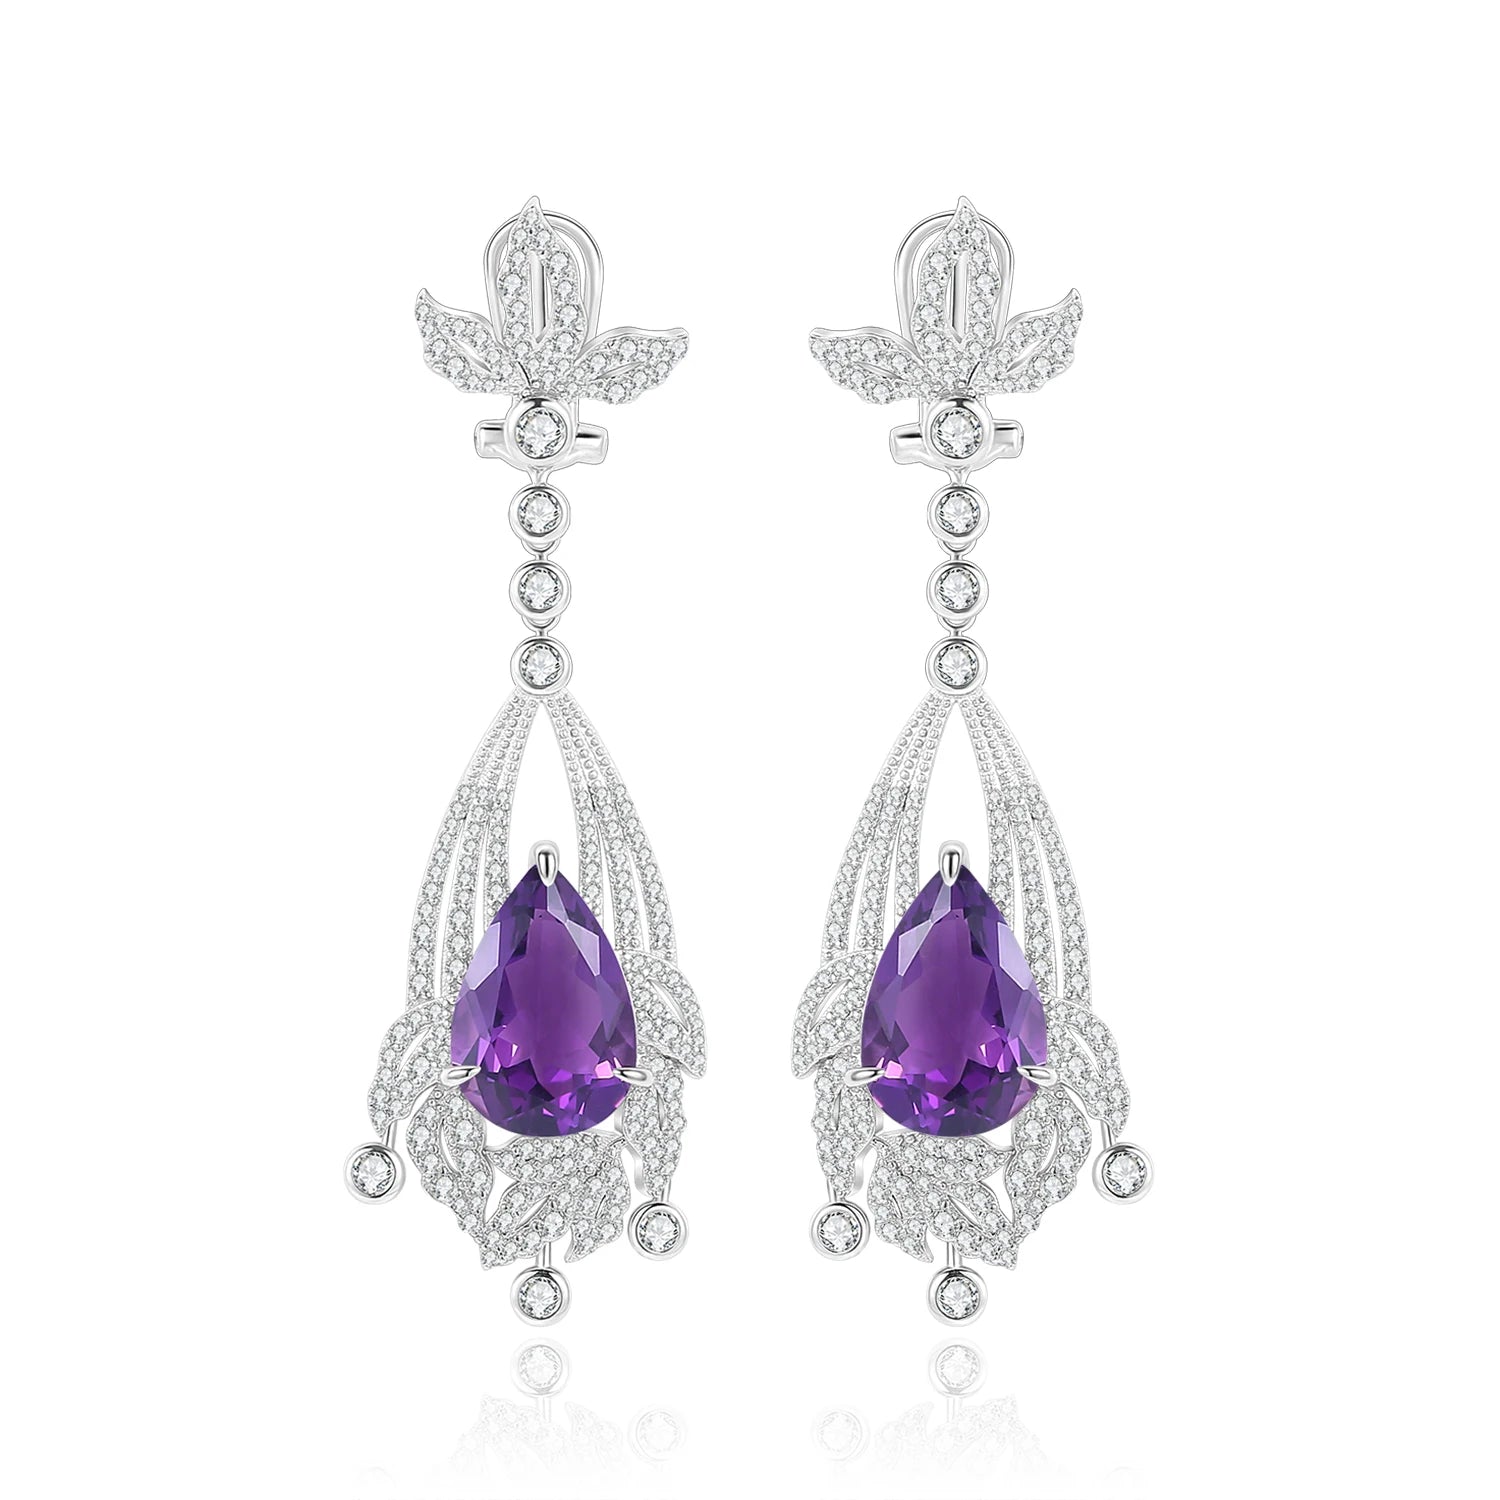 GEM'S BALLET Natural Amethyst Statement Earrings in 925 Sterling Silver Chandelier Earrings Luxury Bridal Jewelry Gift For Her Amethyst 925 Sterling Silver CHINA